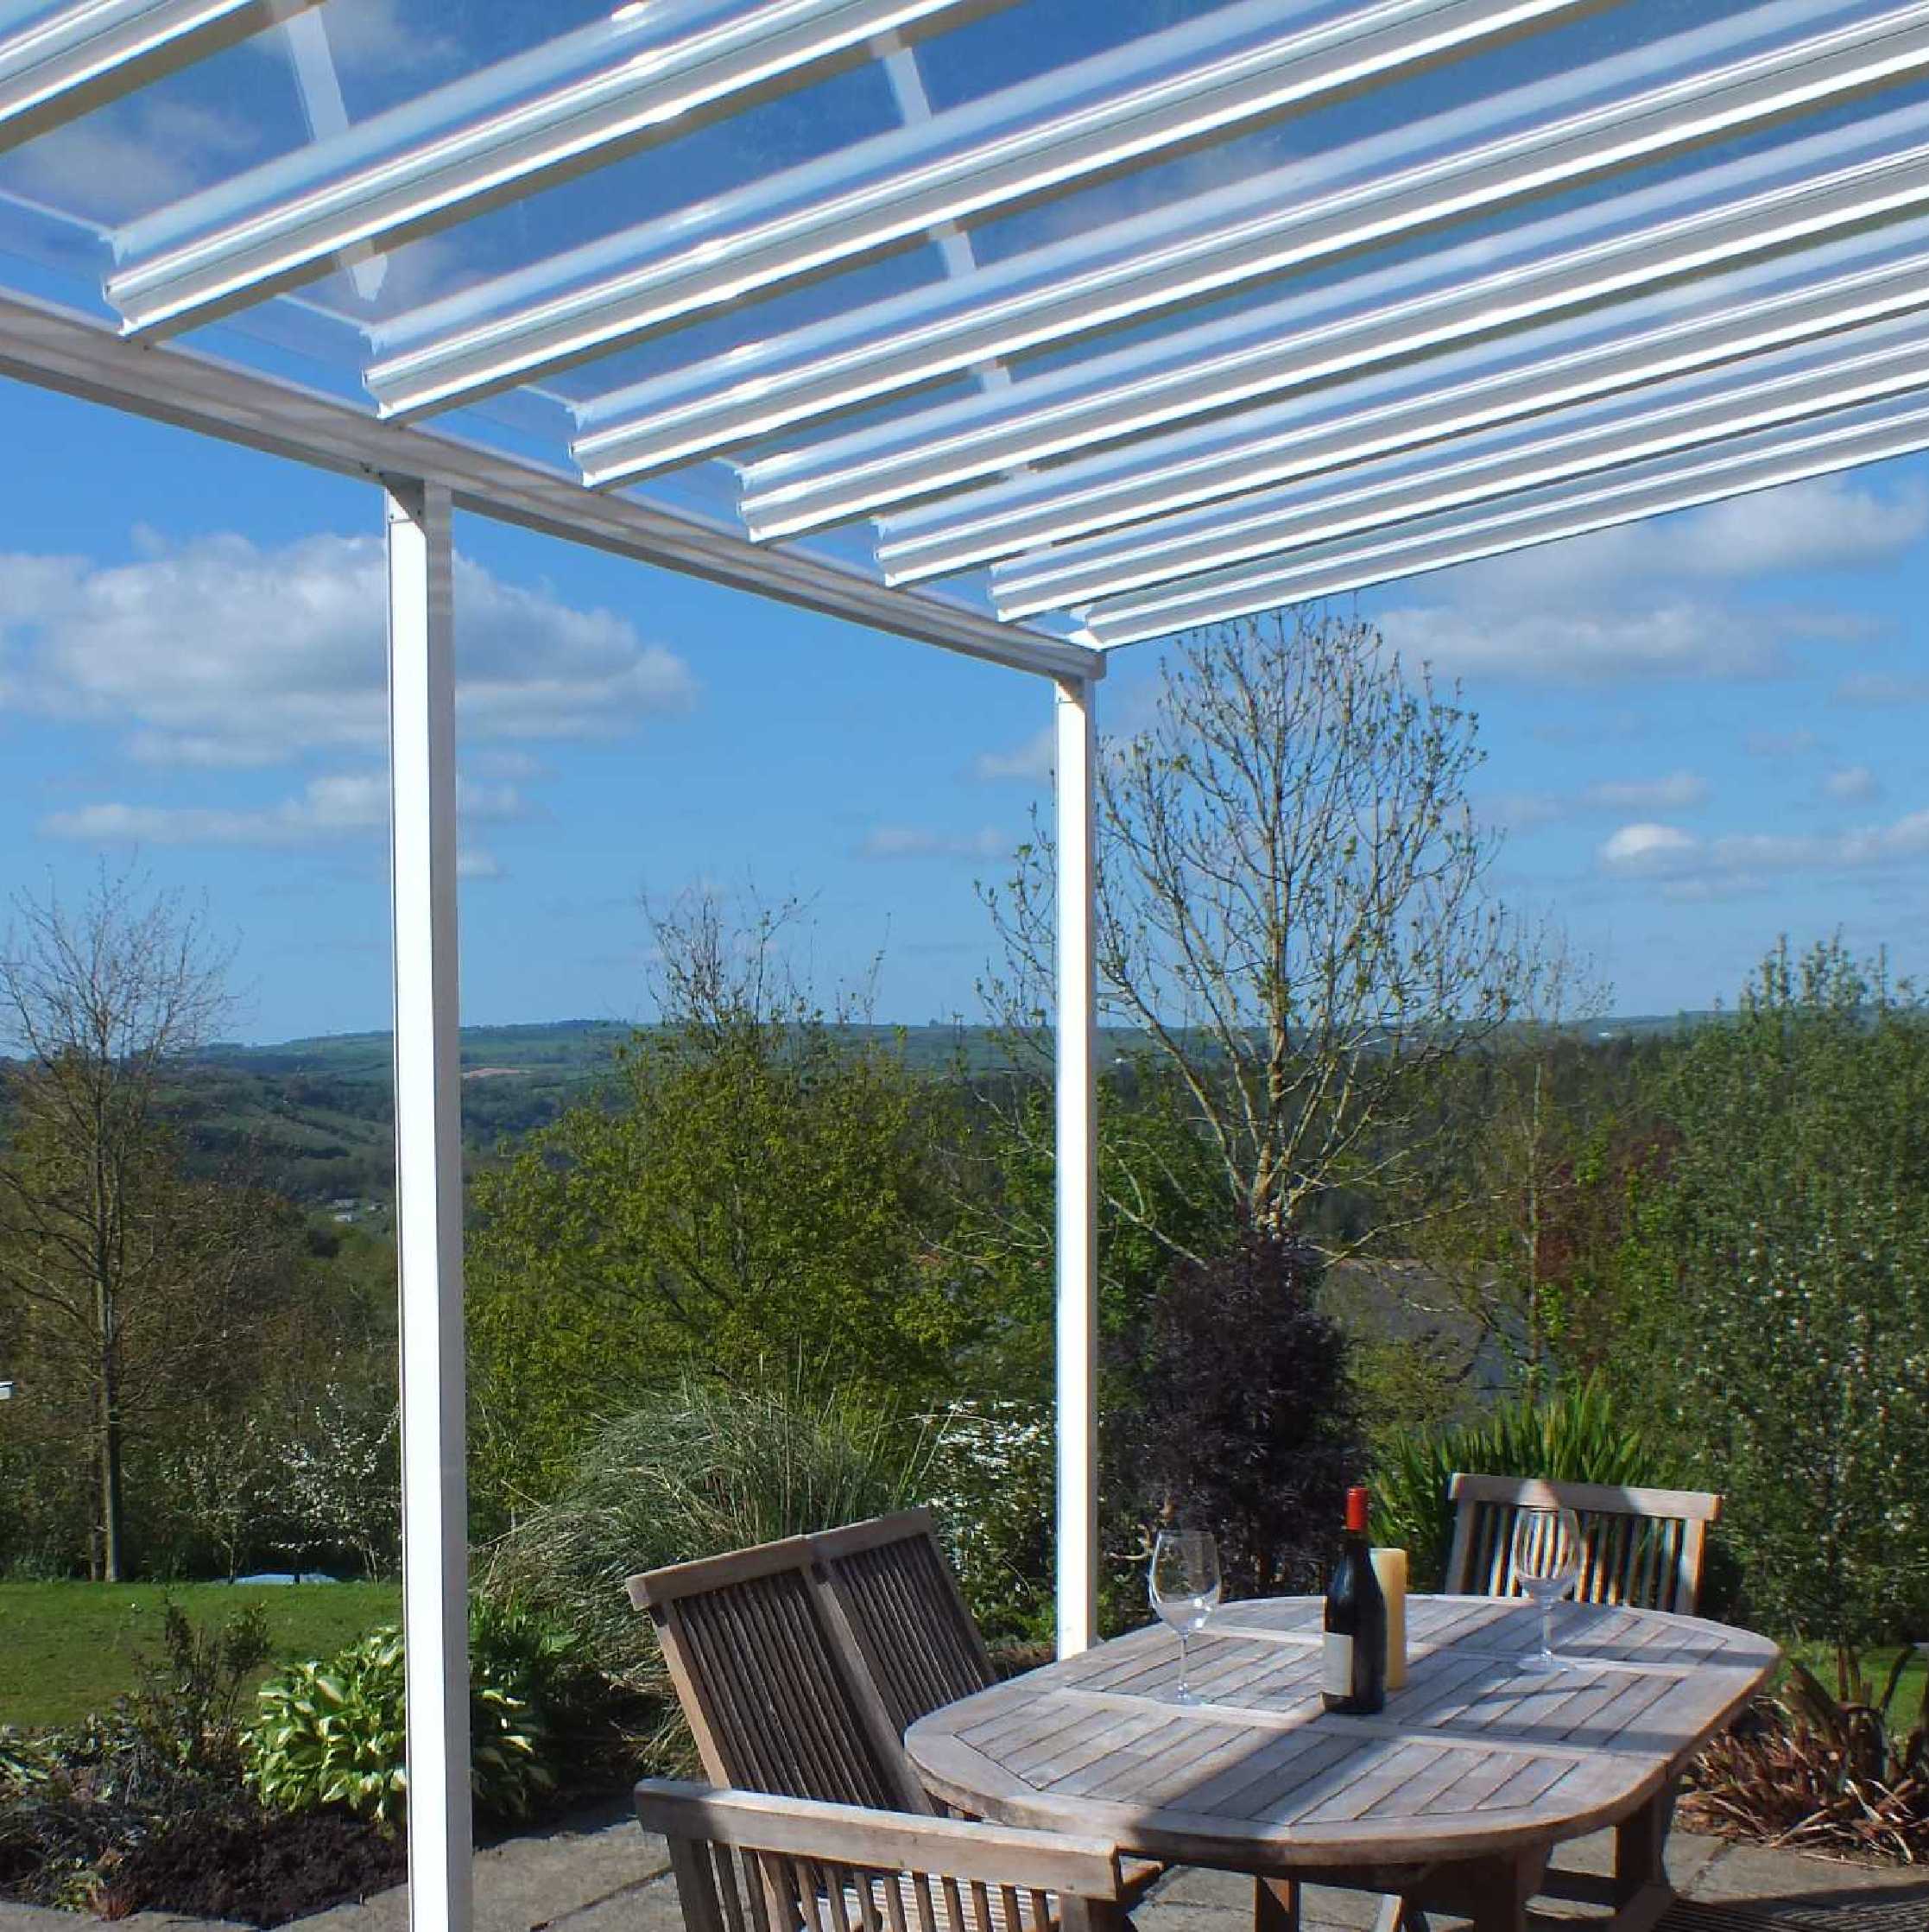 Buy Omega Smart Lean-To Canopy, White UNGLAZED for 6mm Glazing - 7.0m (W) x 2.5m (P), (4) Supporting Posts online today